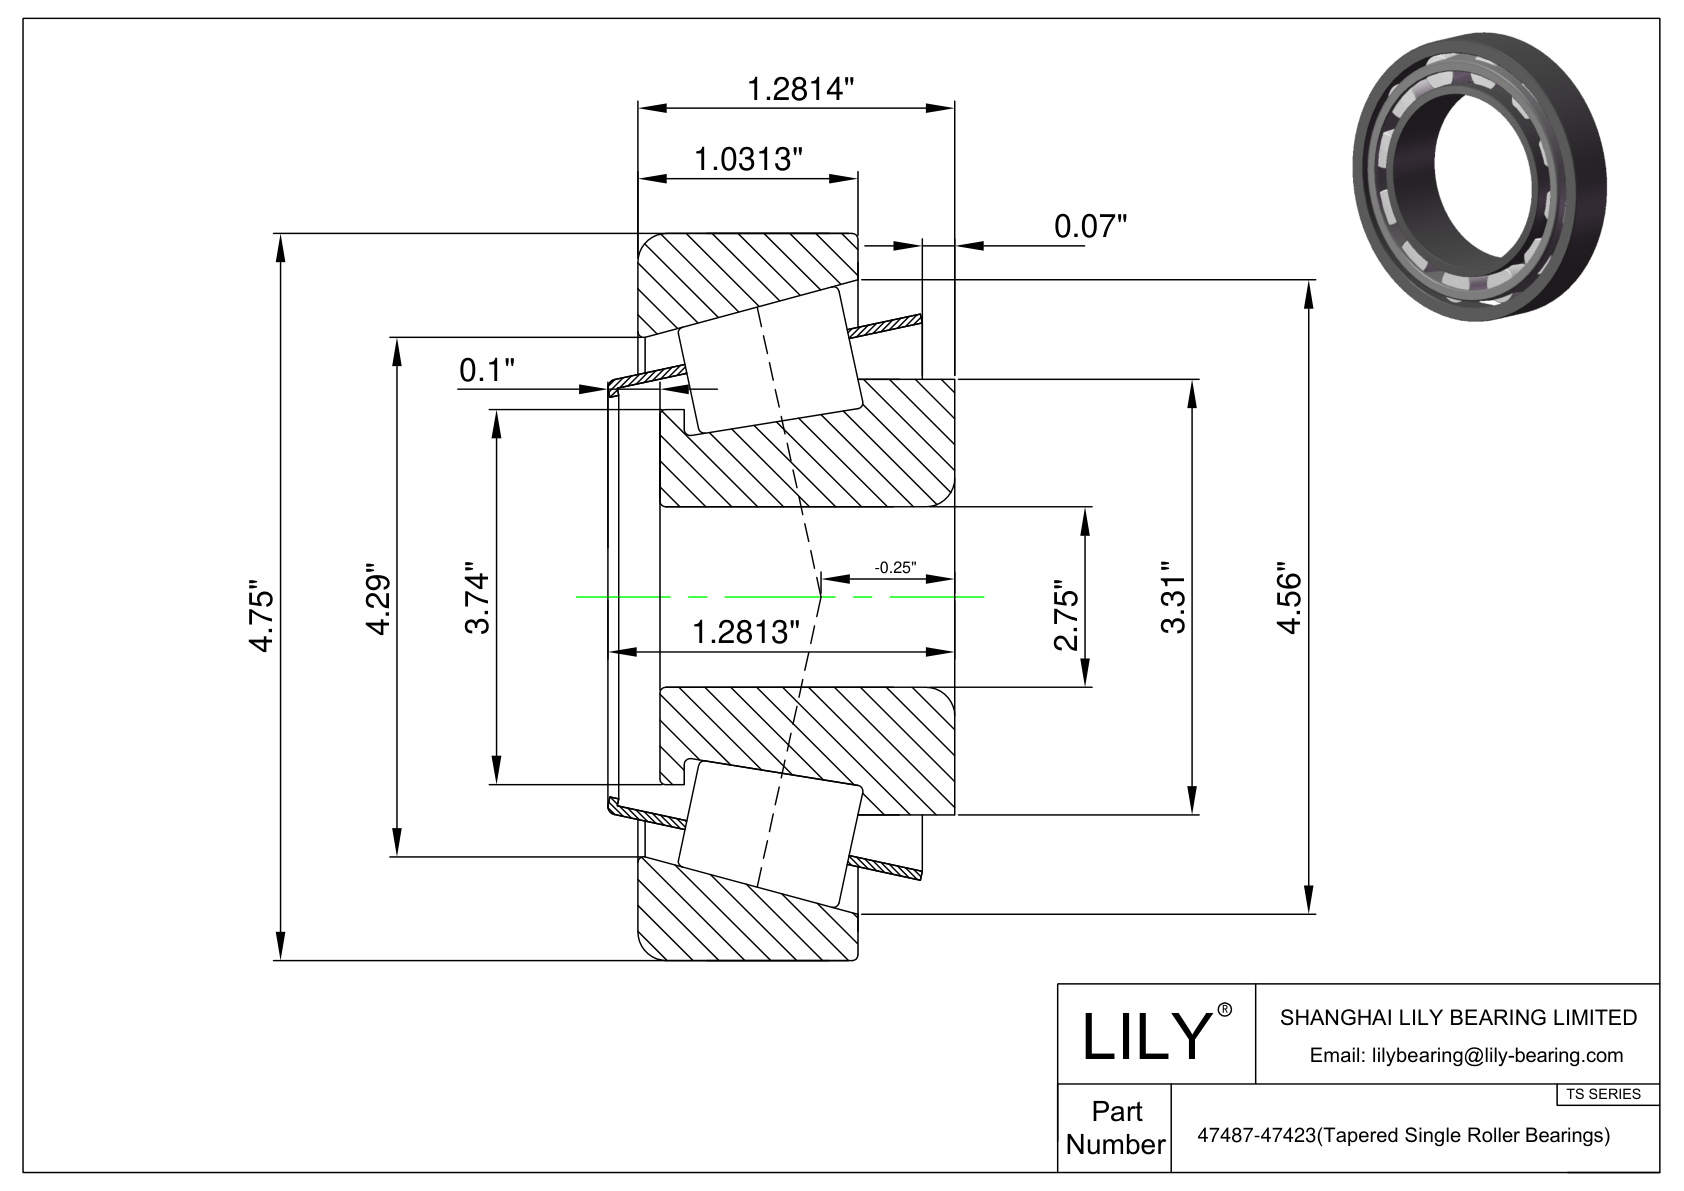 47487-47423 TS (Tapered Single Roller Bearings) (Imperial) cad drawing